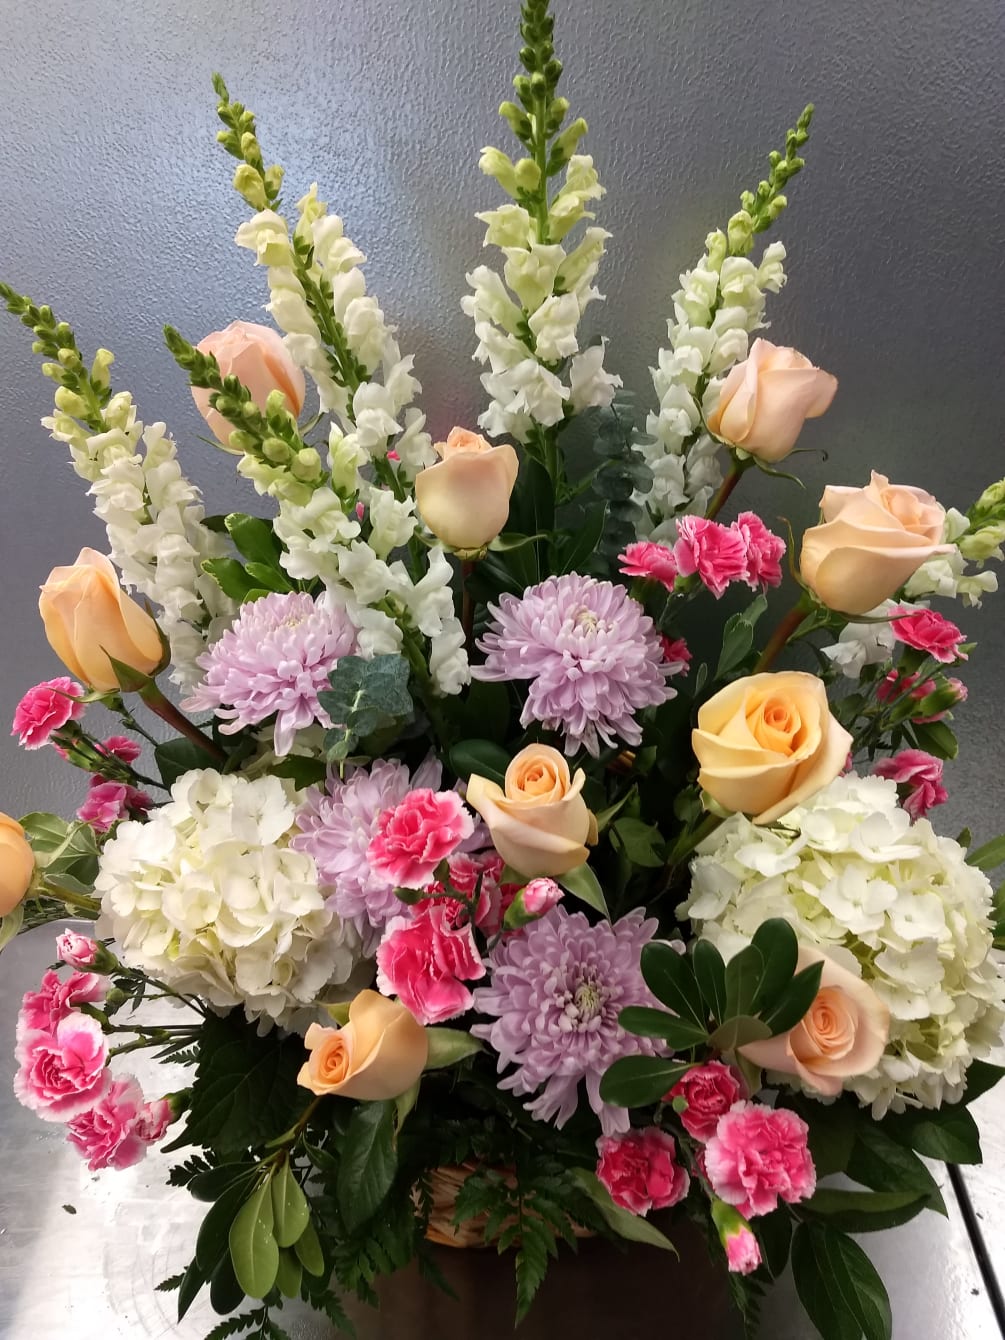 This touching tribute beautifully conveys your sympathy and support. Peach, pink, white